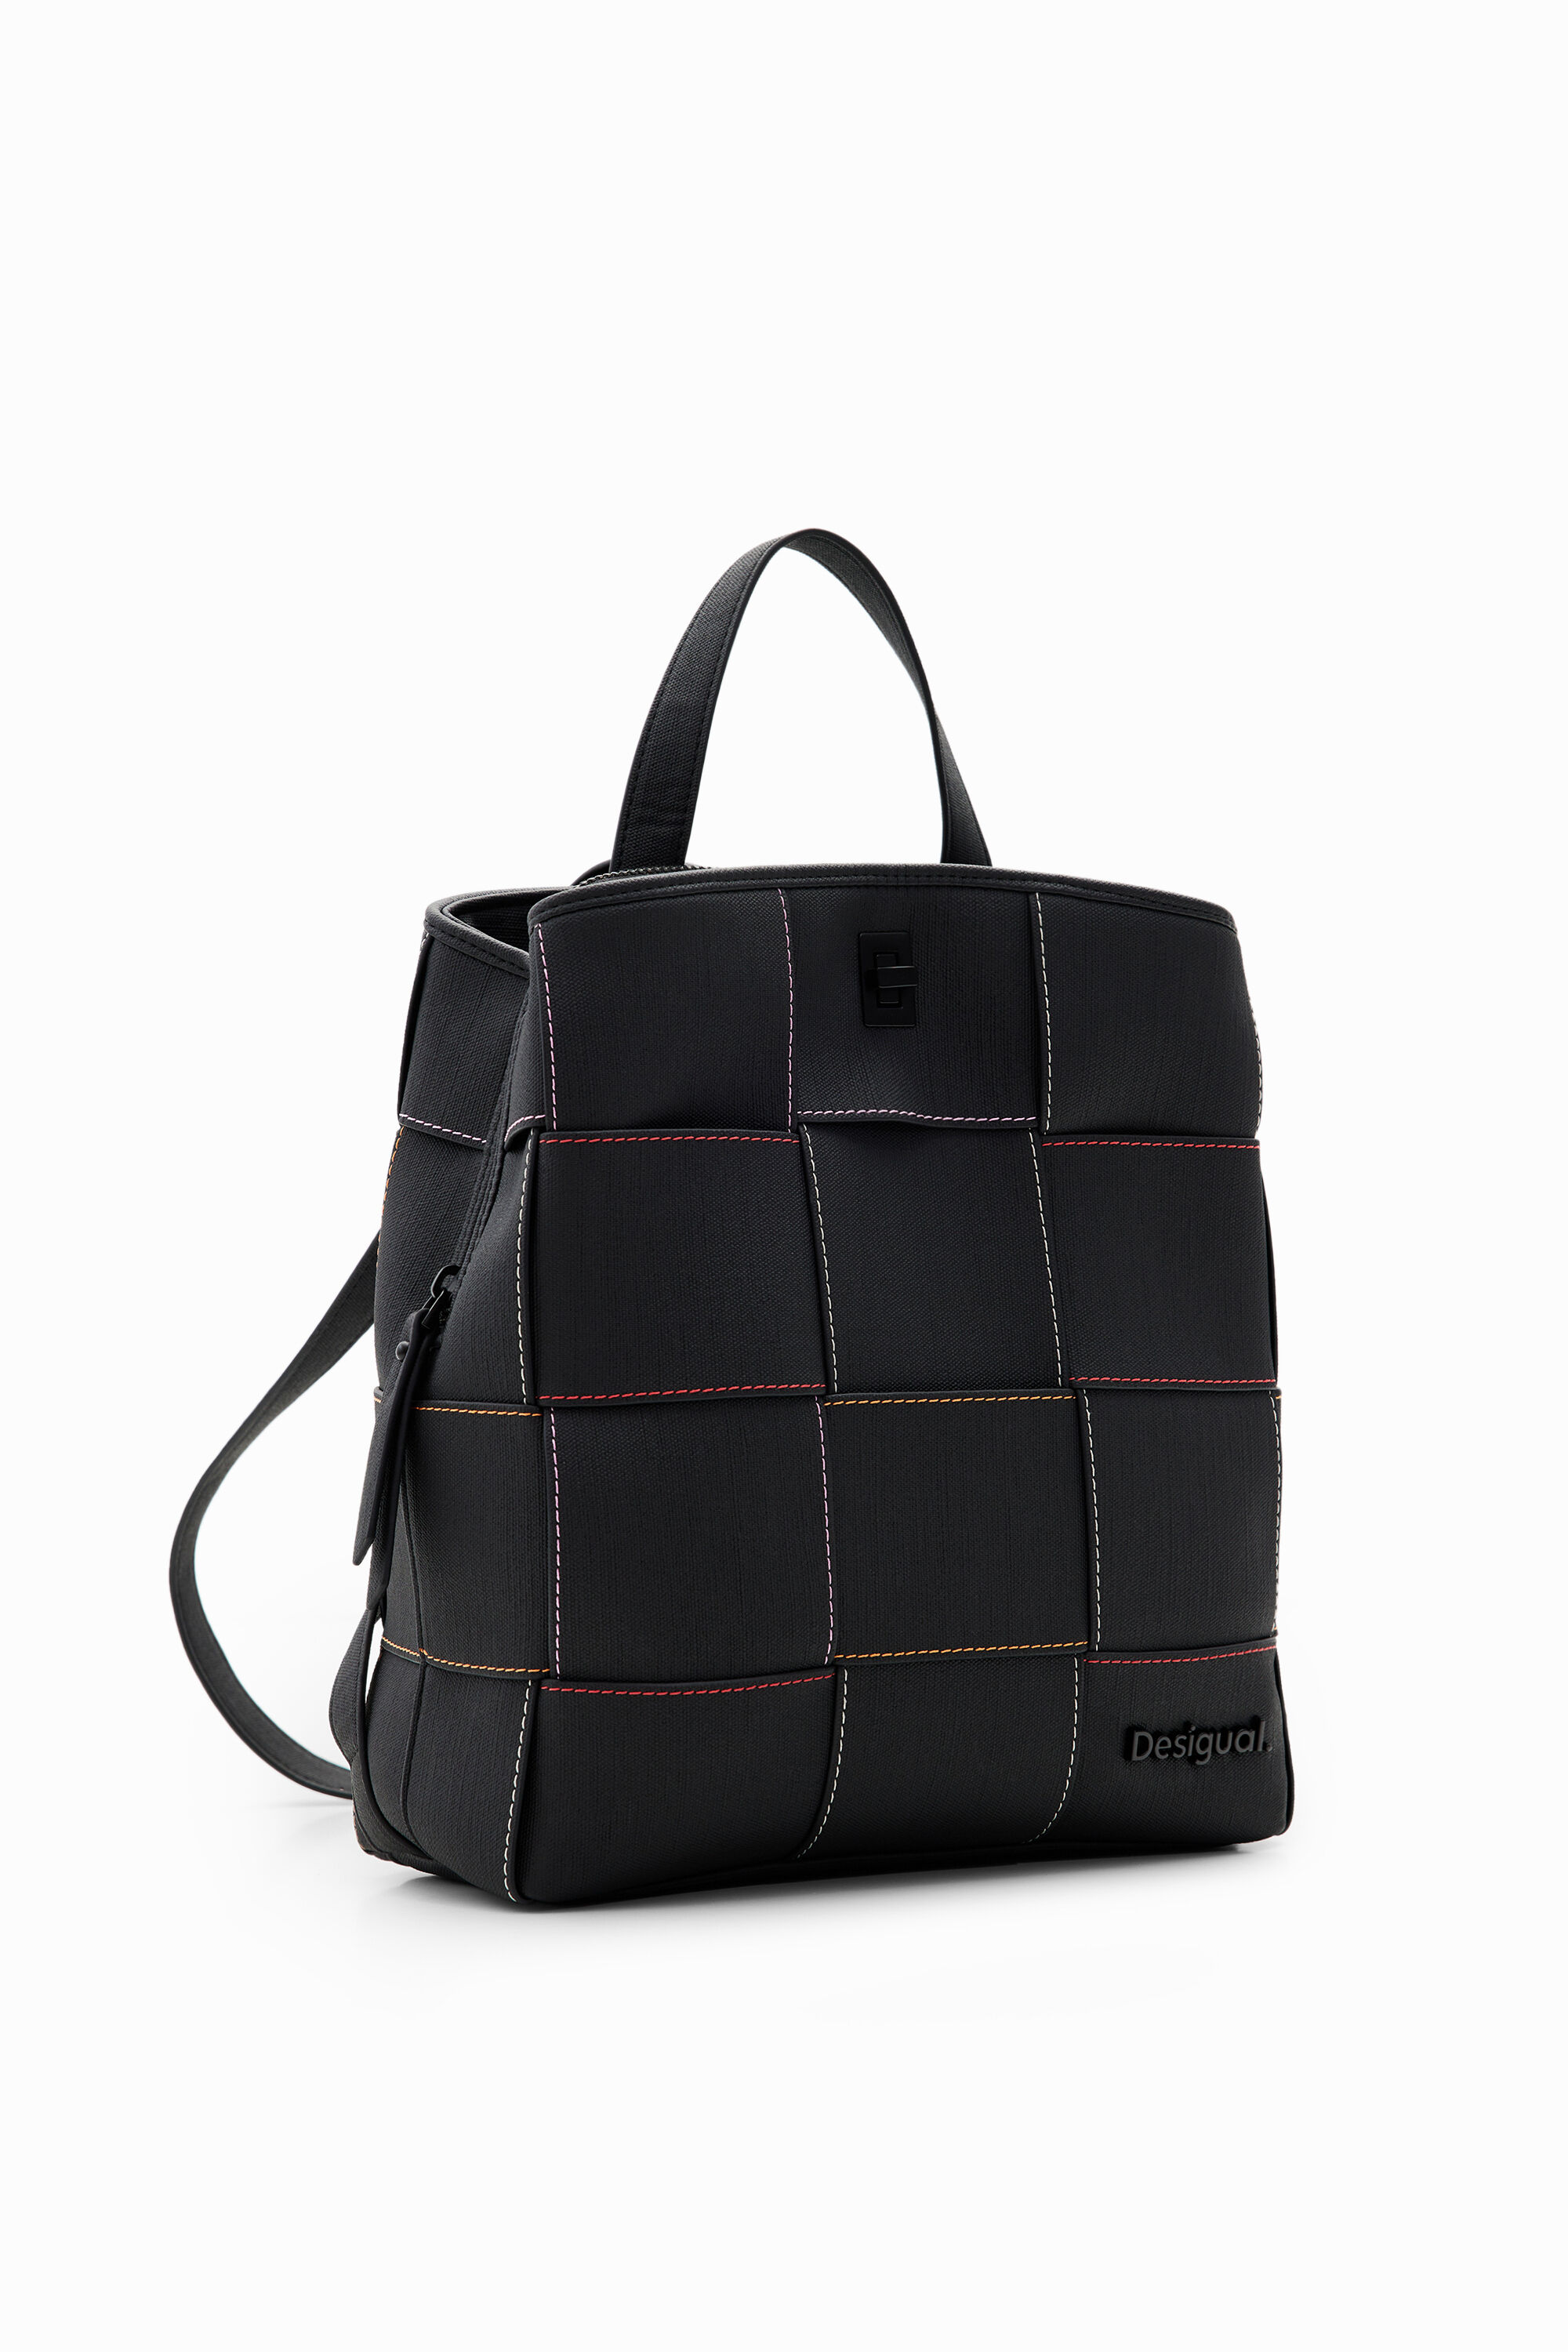 Desigual S woven stitching backpack